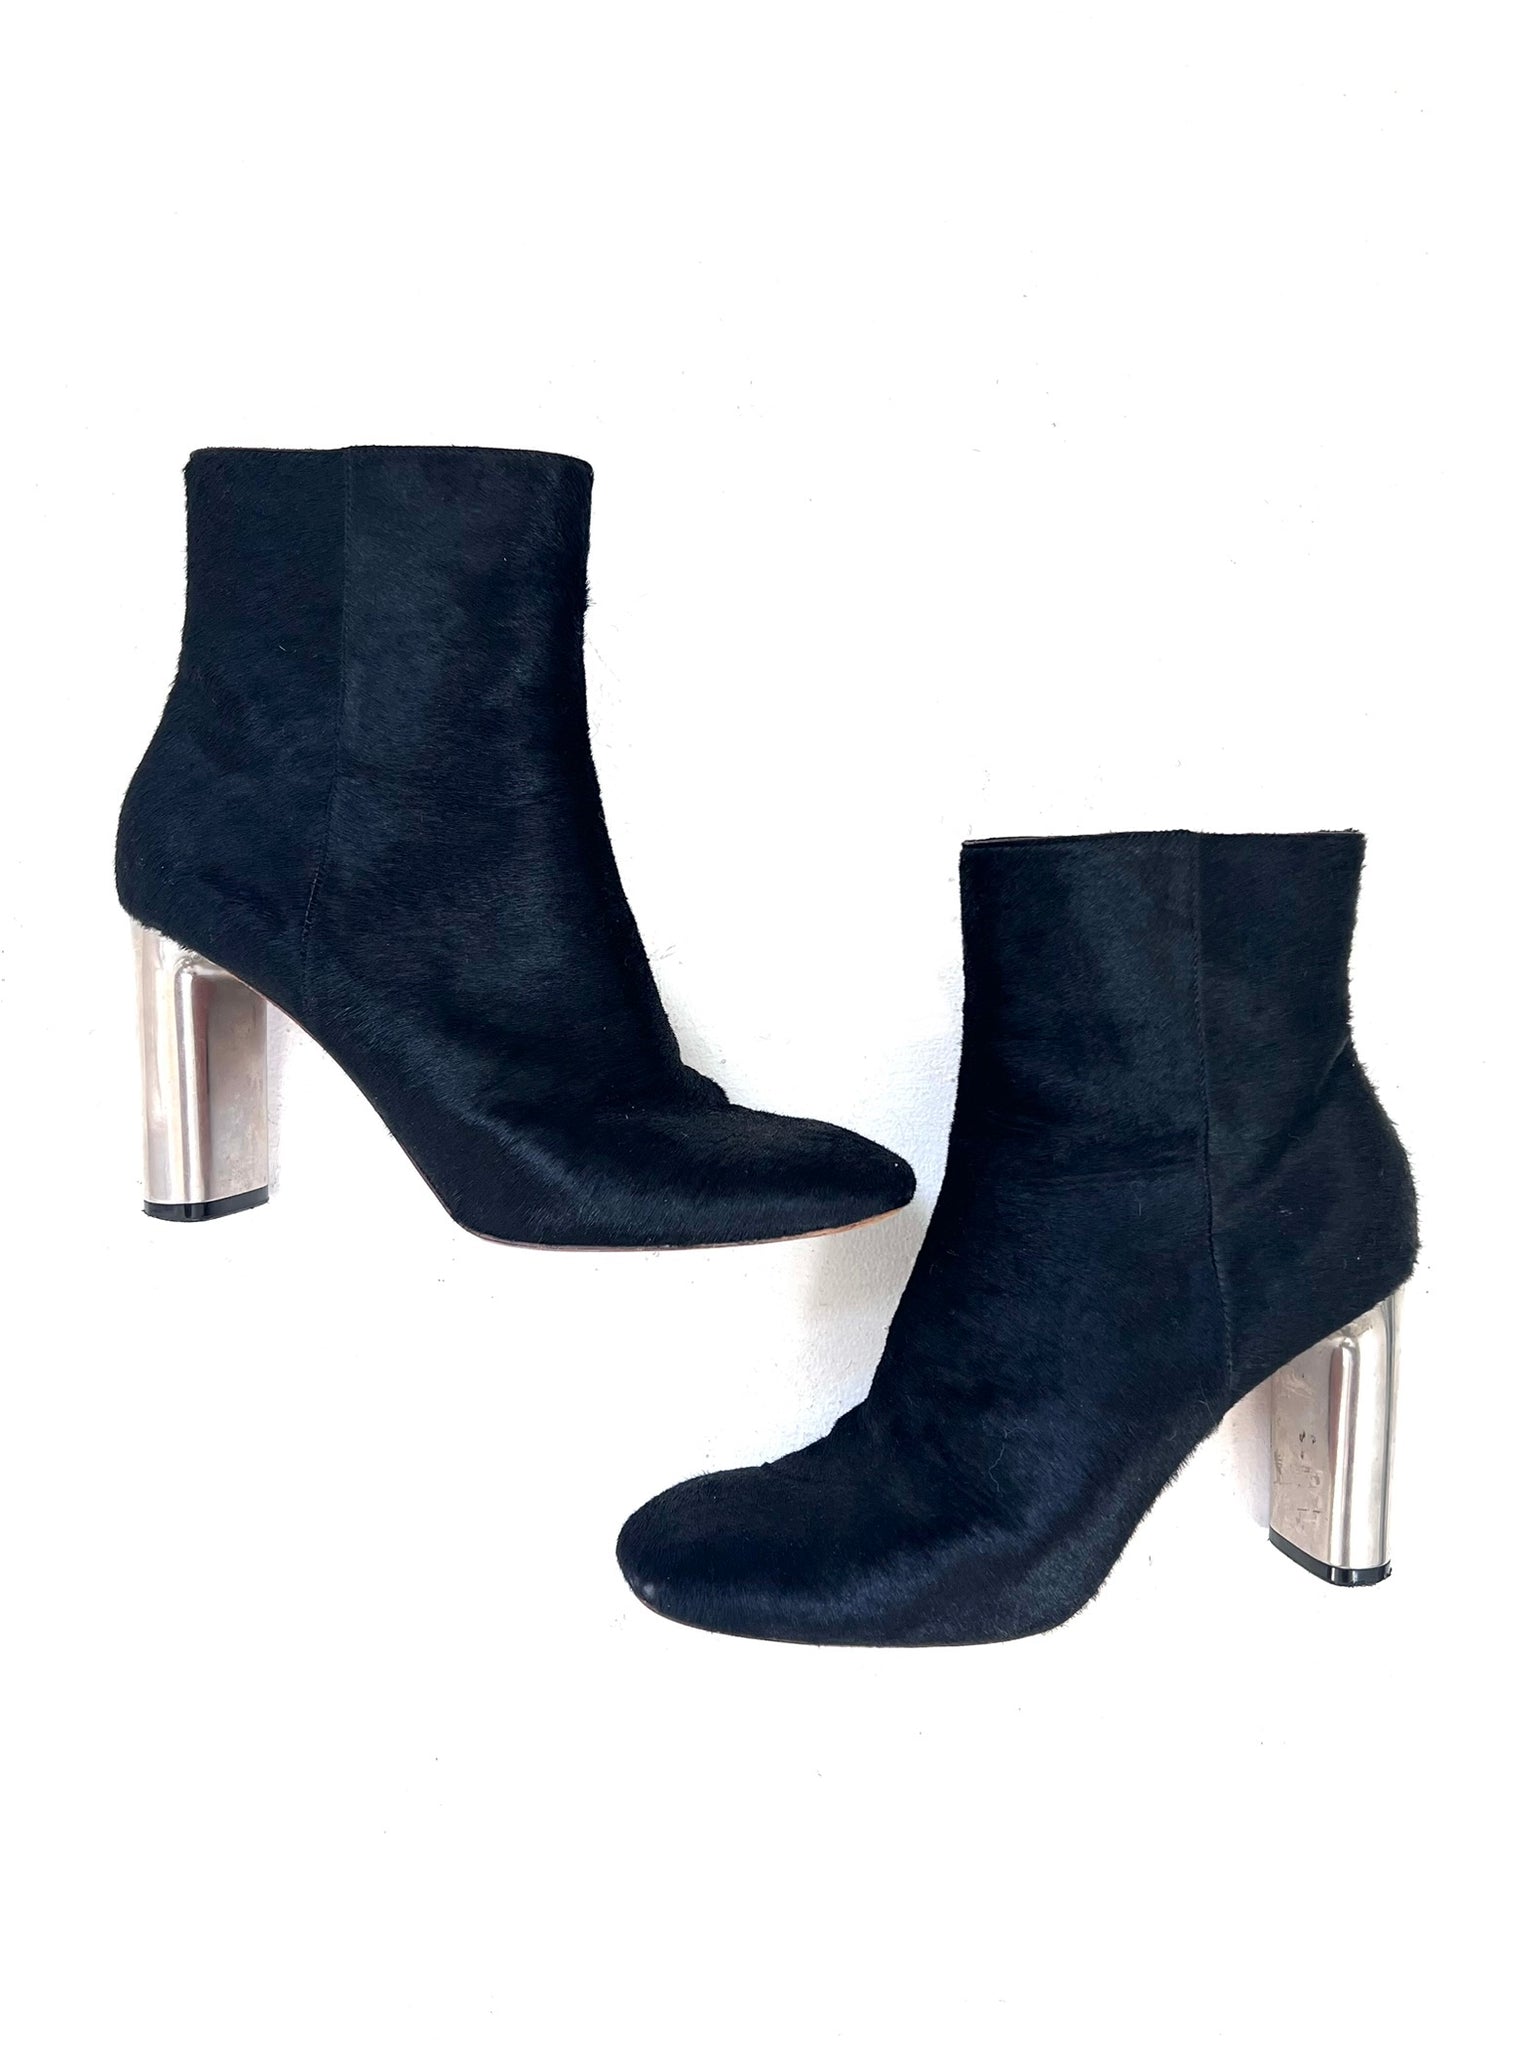 Black Pony Hair Ankle Boot by Celine